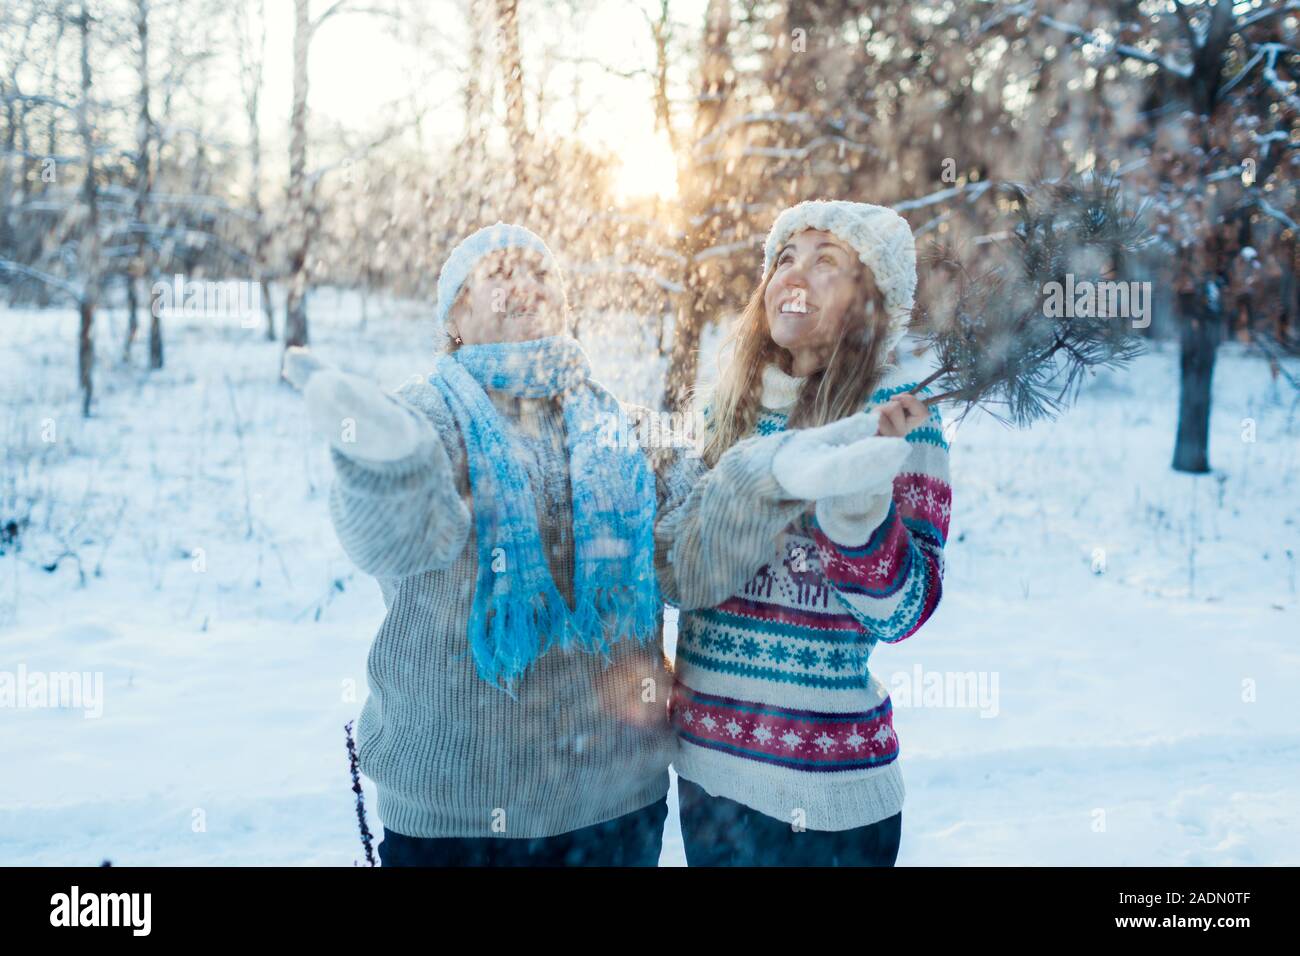 Winter fun activities. Mother and adult daughter throwing snow outdoors. Family relaxing in forest for holidays Stock Photo